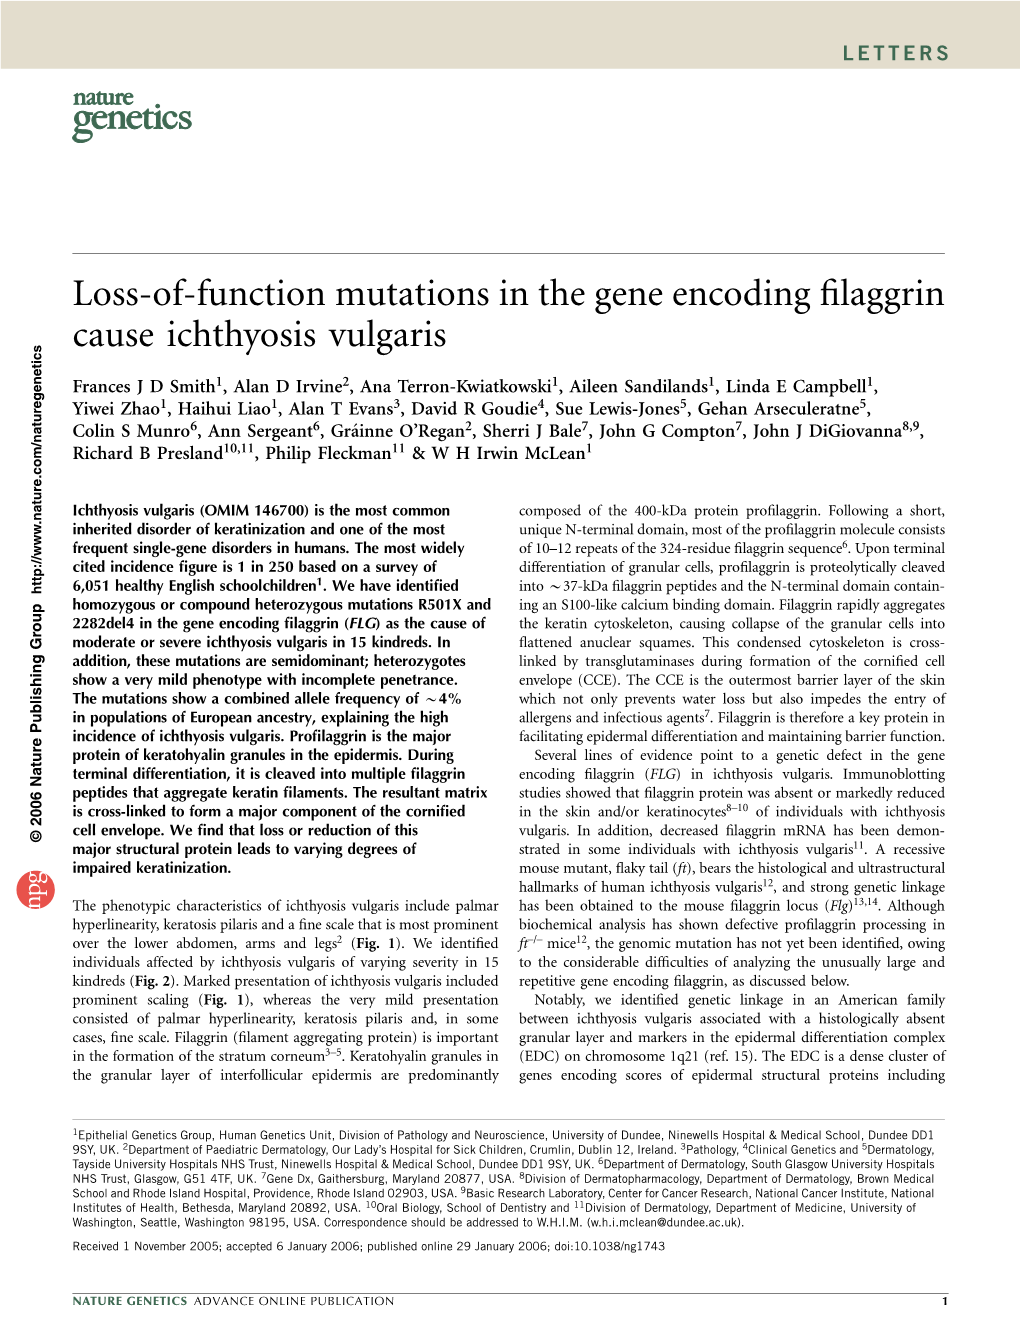 Loss-Of-Function Mutations in the Gene Encoding Filaggrin Cause Ichthyosis